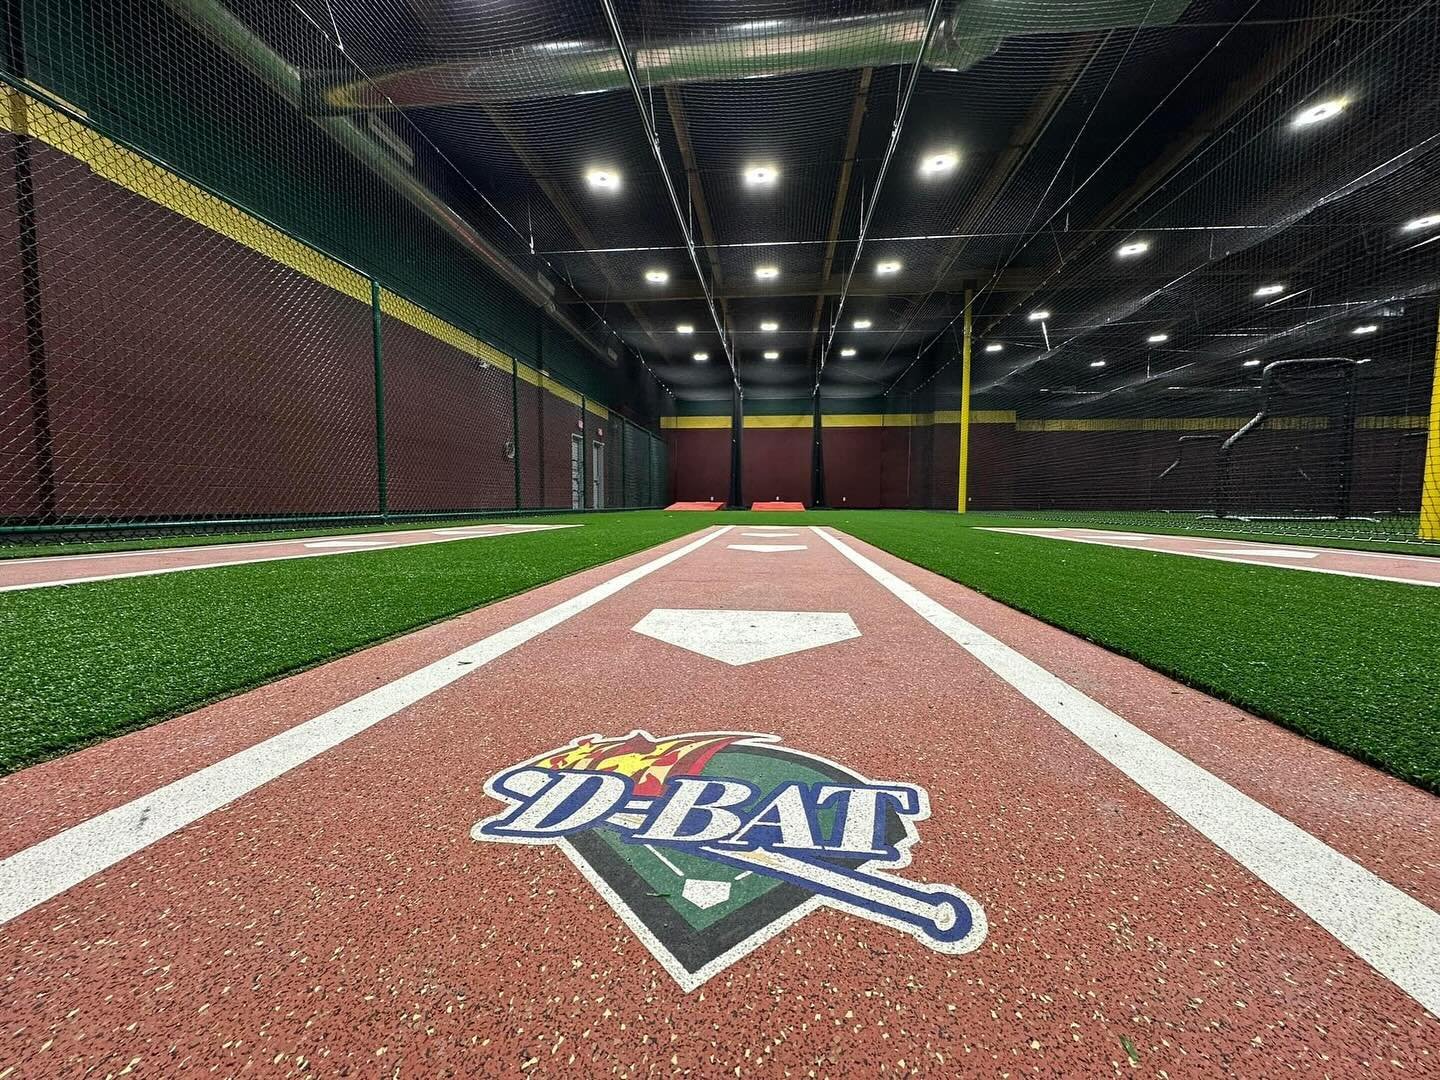 Building dreams one swing at a time ⚾️🏗️ Excited to bring you this new DBat Baseball Academy to coach greatness at their new location in Redlands, CA. 
#TIConstructionInc #ConstructionExcellence #DBatBaseball #dbat #construction #drywall #satisfying